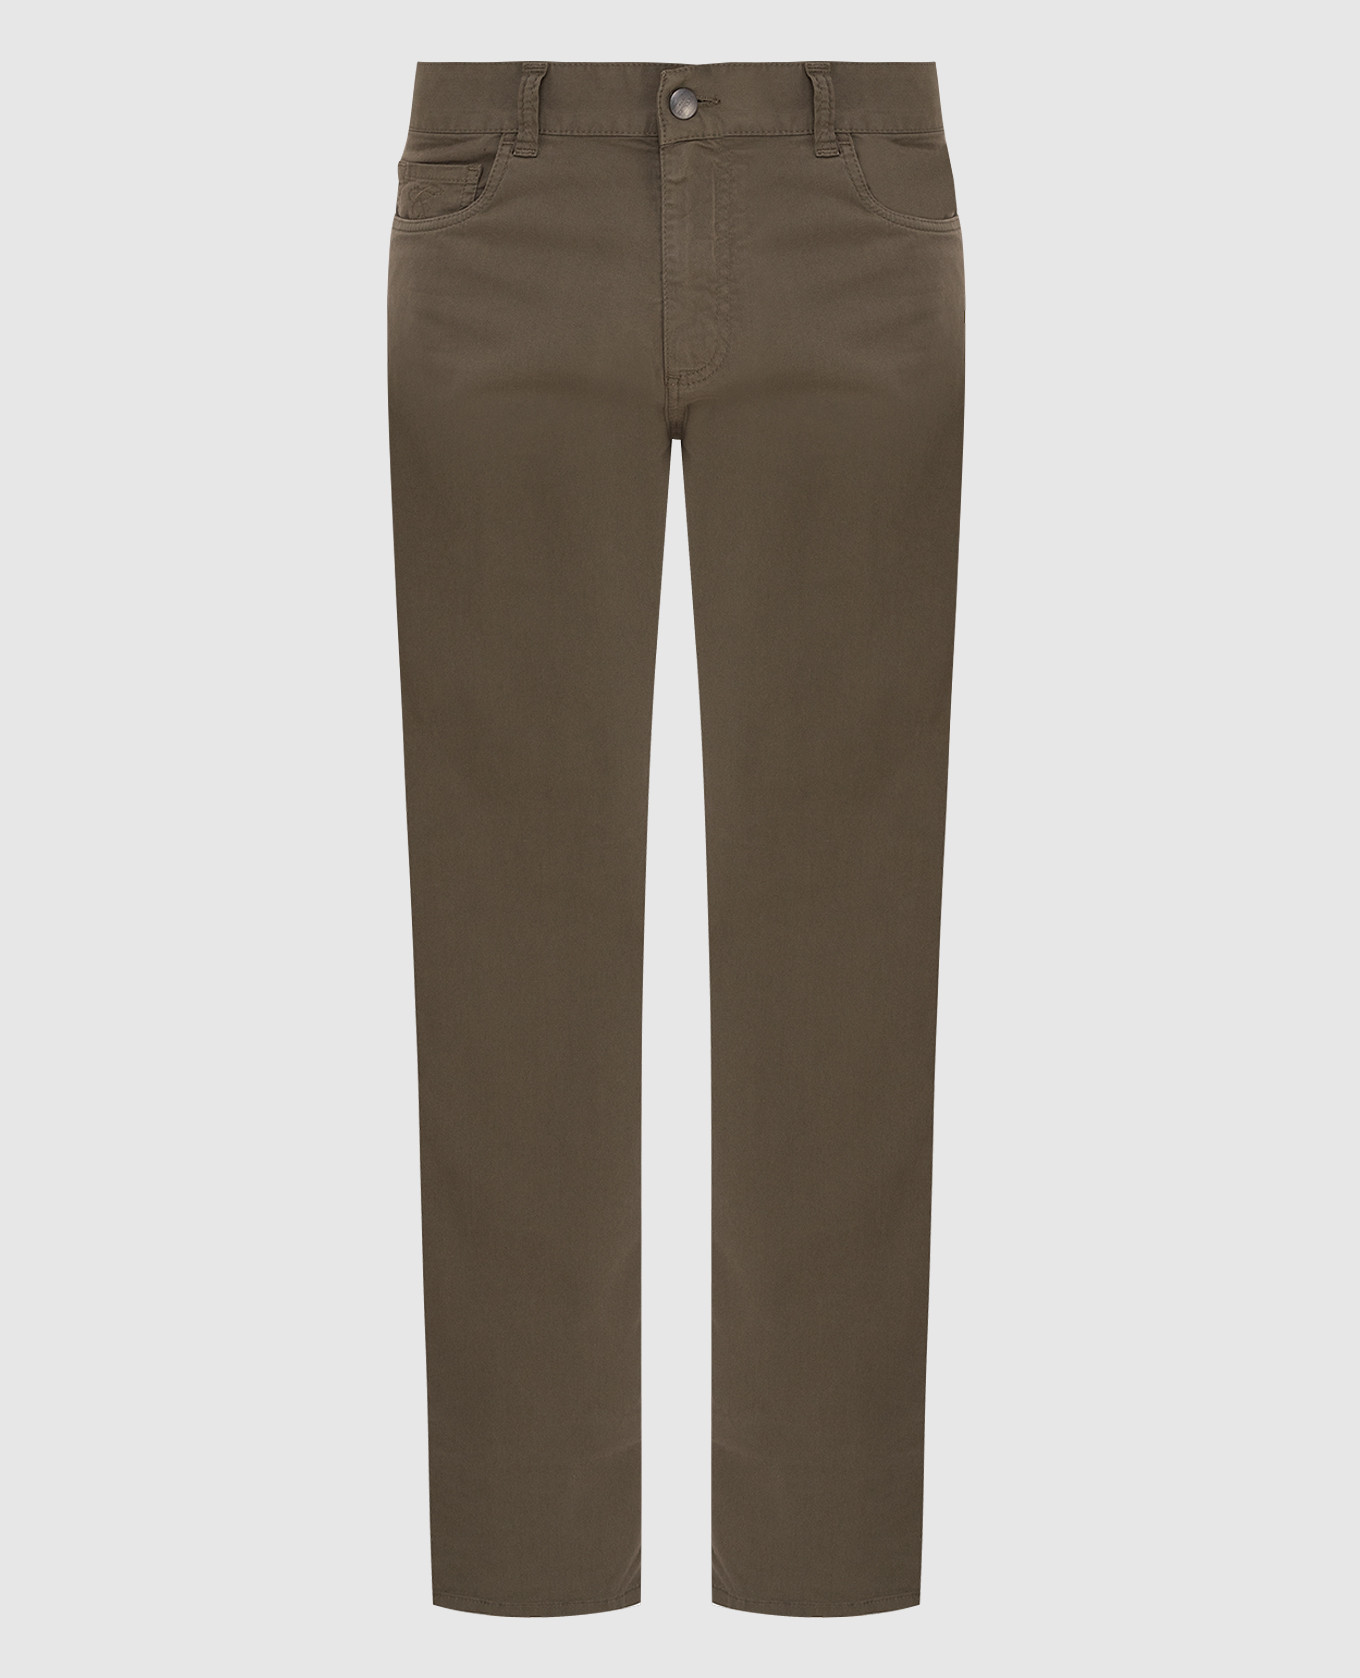 Canali - Olive trousers PT0045291519R - buy with European delivery at ...